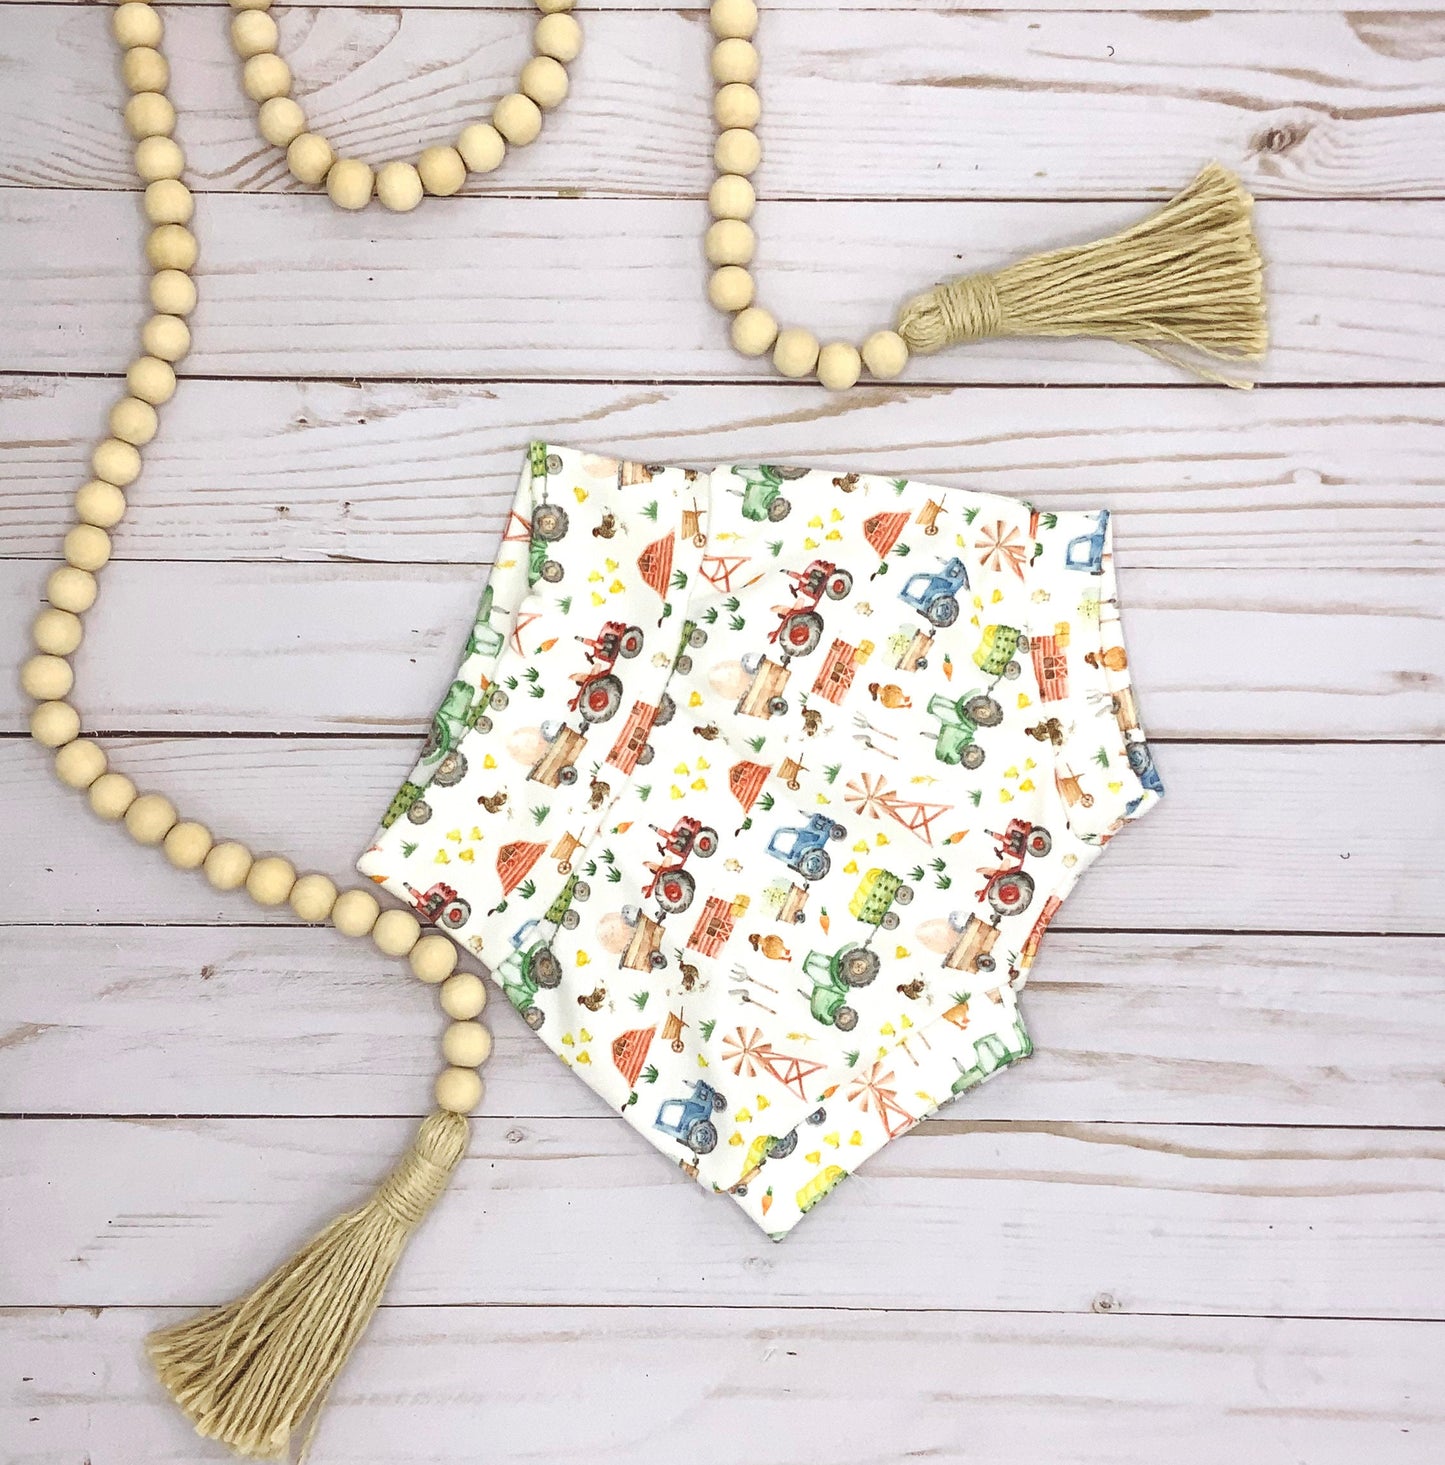 Spring Farm Print Organic cotton bummies shorts for baby and toddler in cute farm print with tractors, wagons, windmills and more farm related items